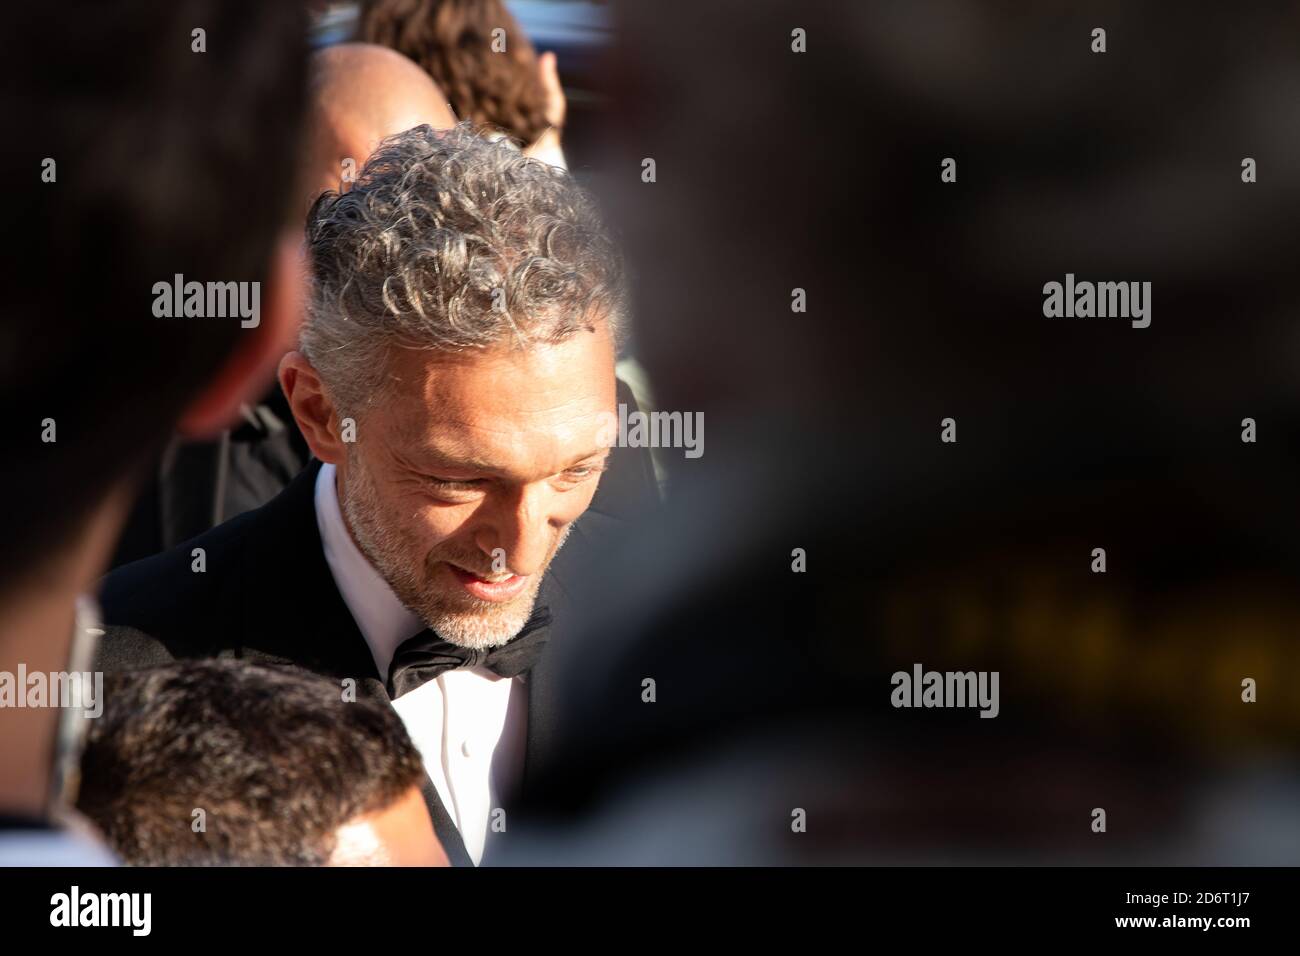 CANNES, FRANCE - May 25, 2019: Vincent Cassel takes photos with fans and signs autographs Stock Photo